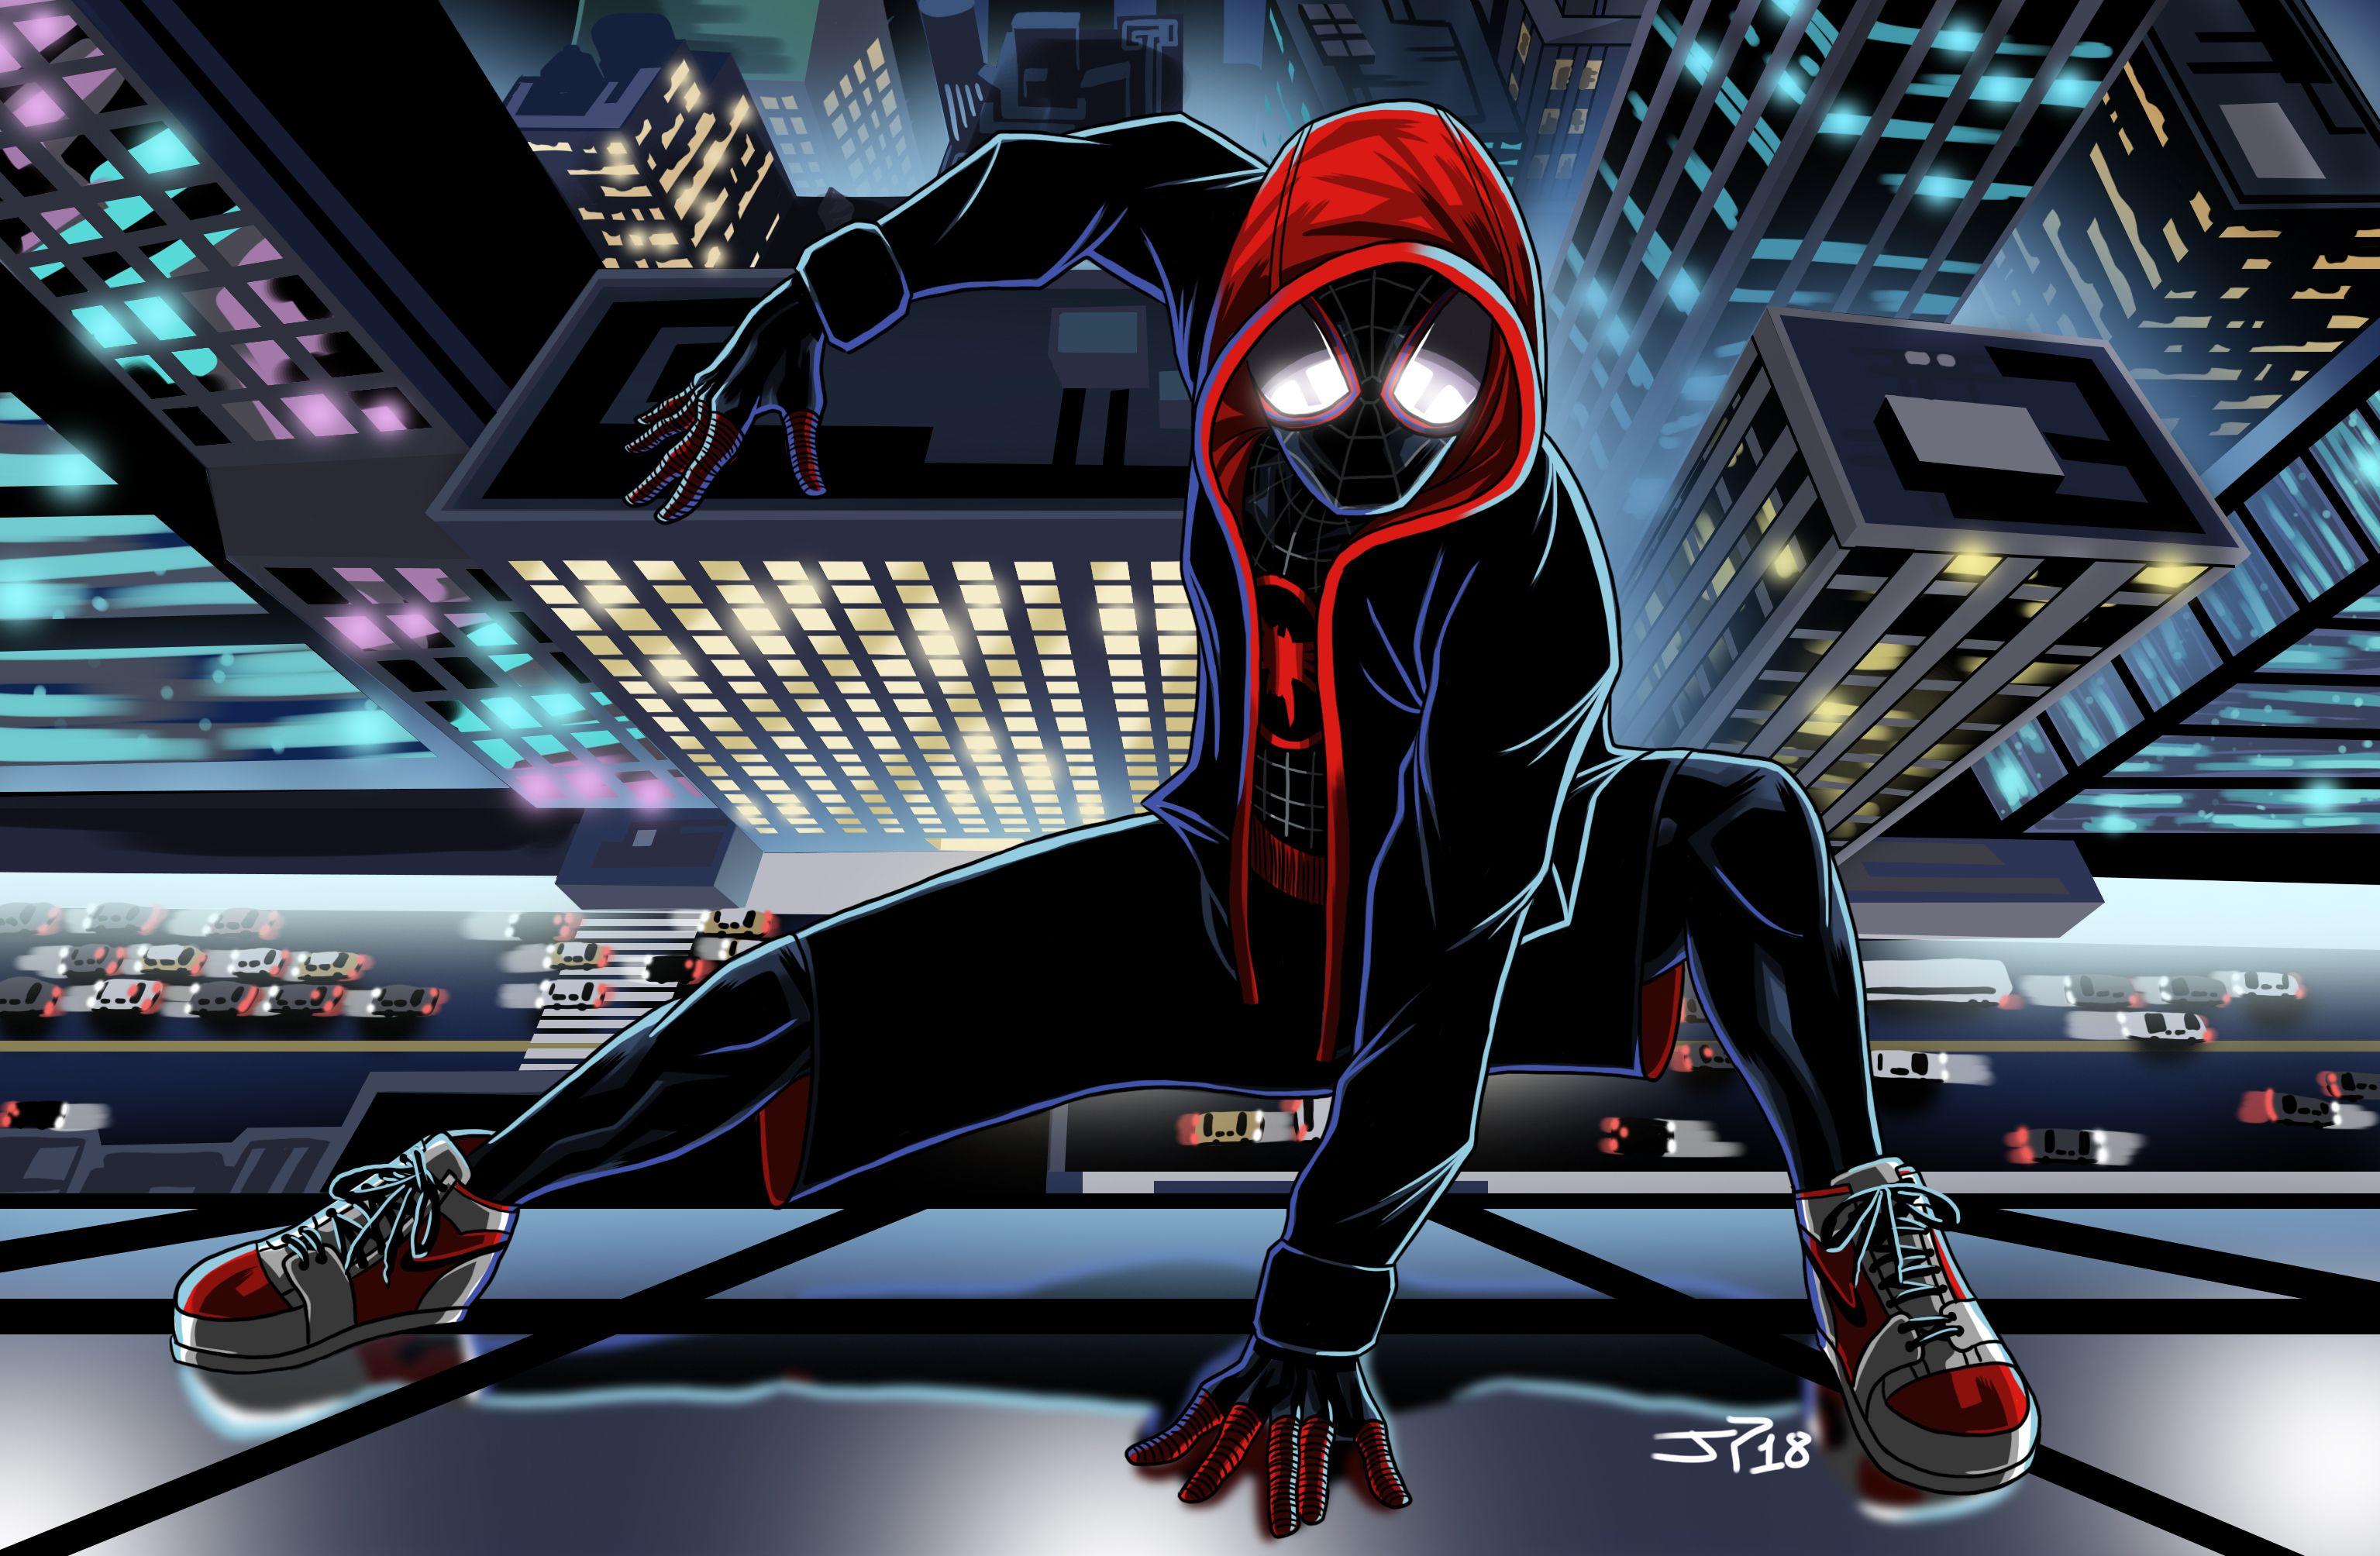 Wallpaper Spider Man, Miles Morales, Marvel Comics, HD, Creative Graphics,. Wallpaper For IPhone, Android, Mobile And Desktop